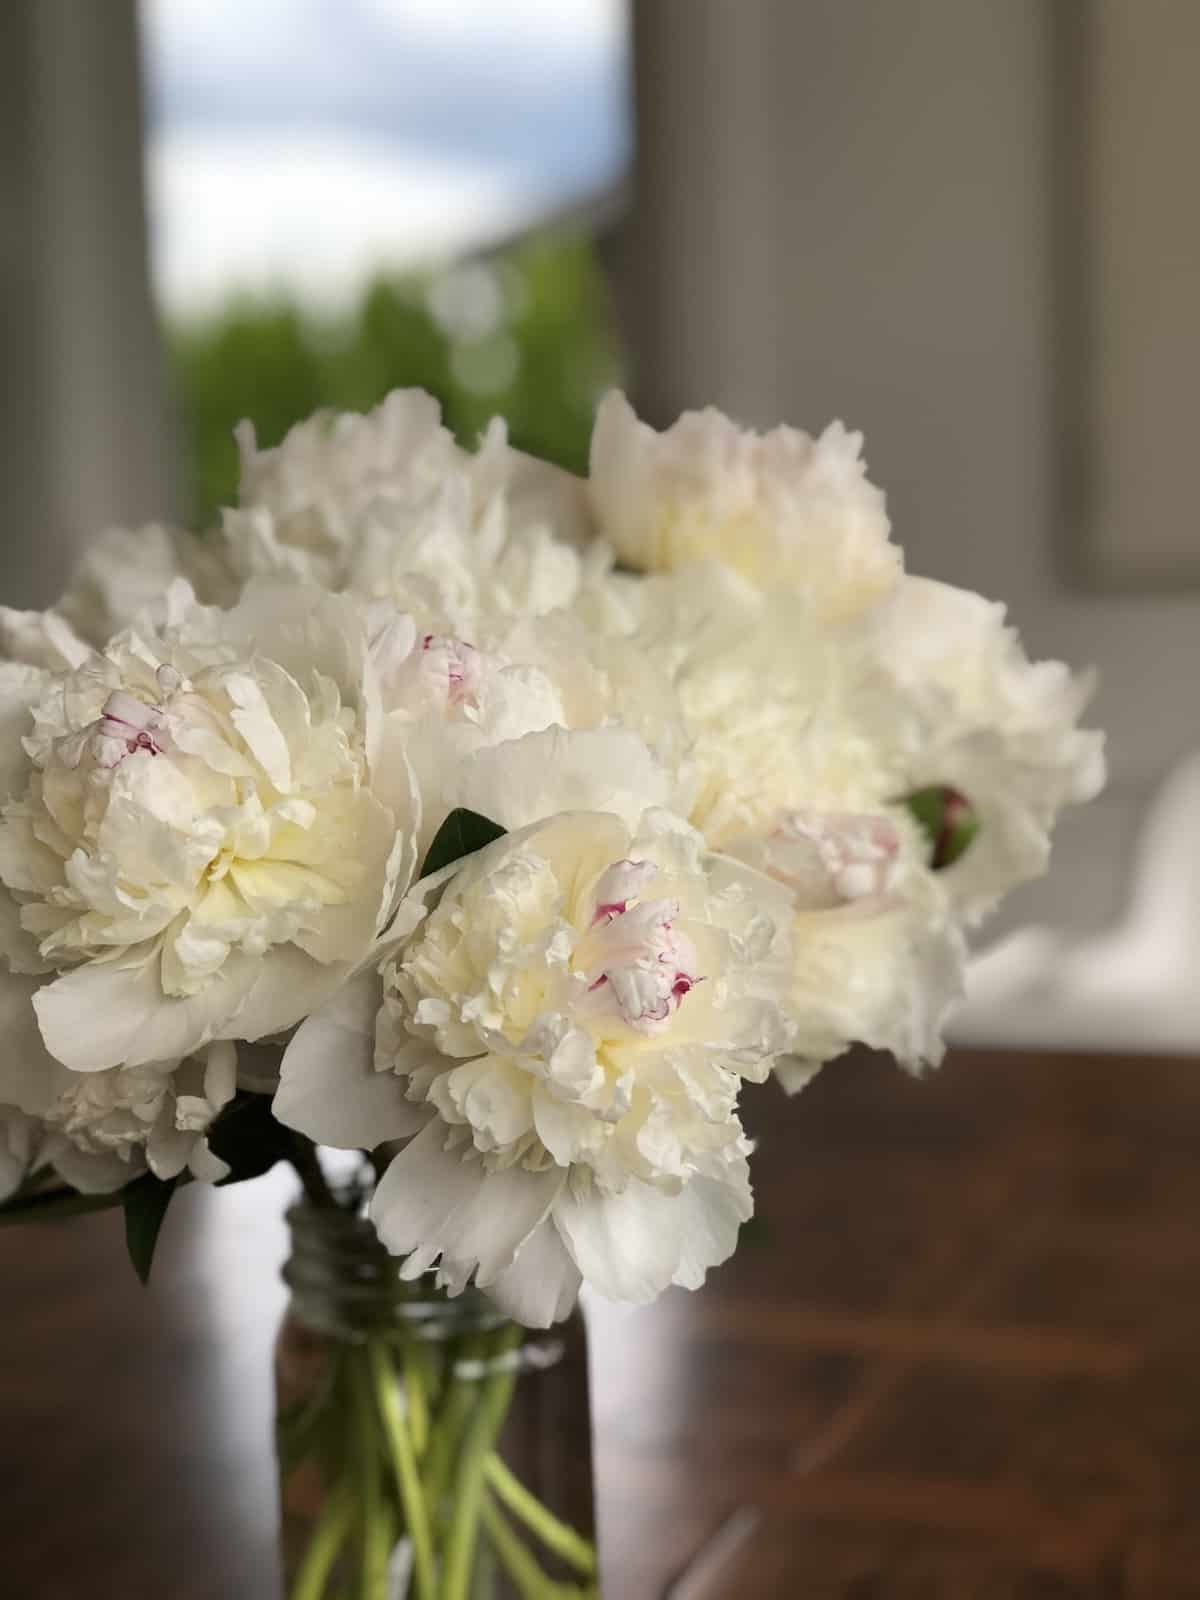 Fresh white peony blooms in glass jar on wood table - festiva maxima peonies